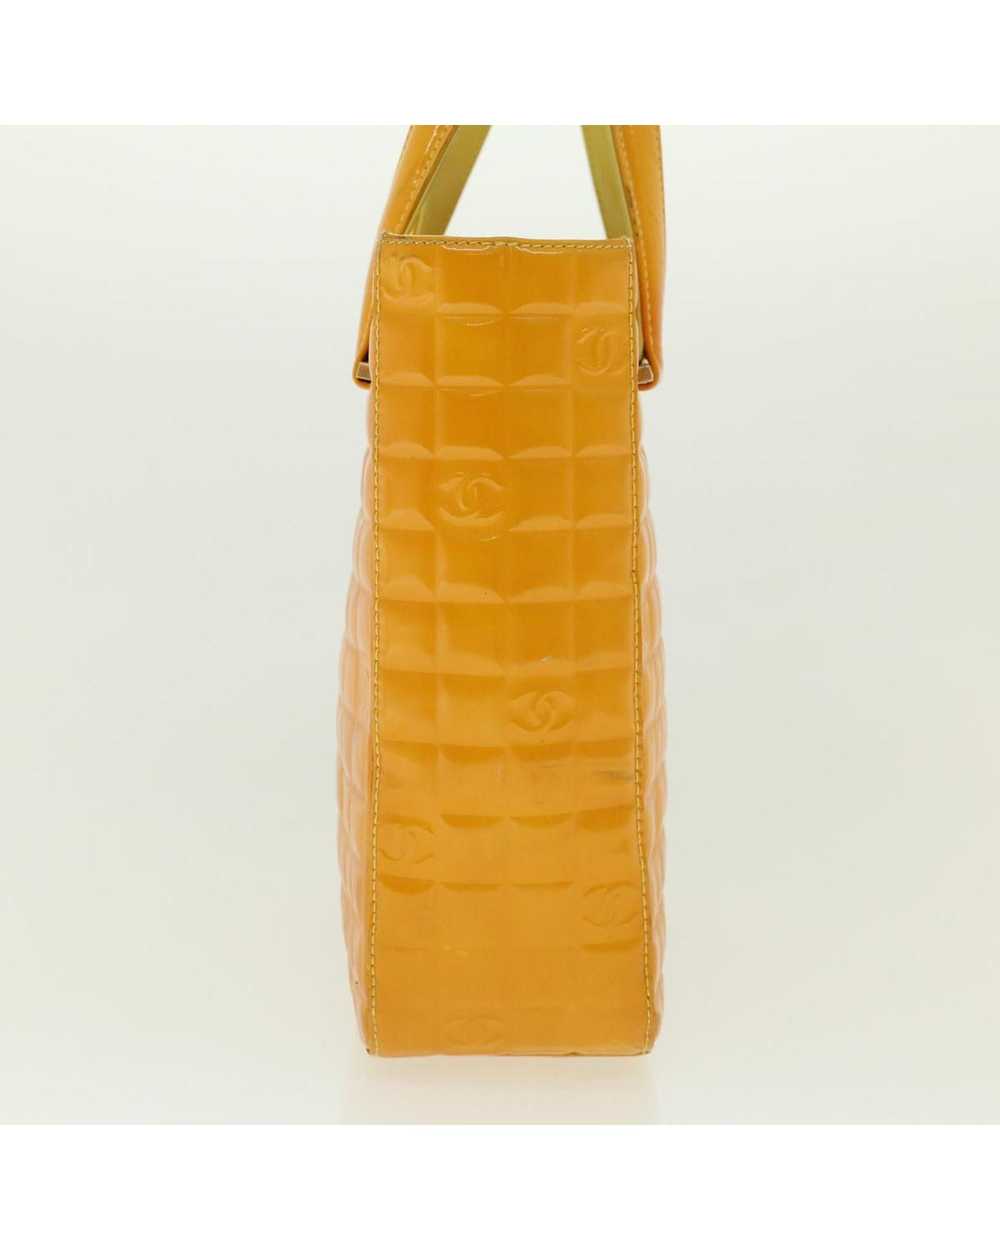 Chanel Yellow Patent Leather Hand Bag - image 4